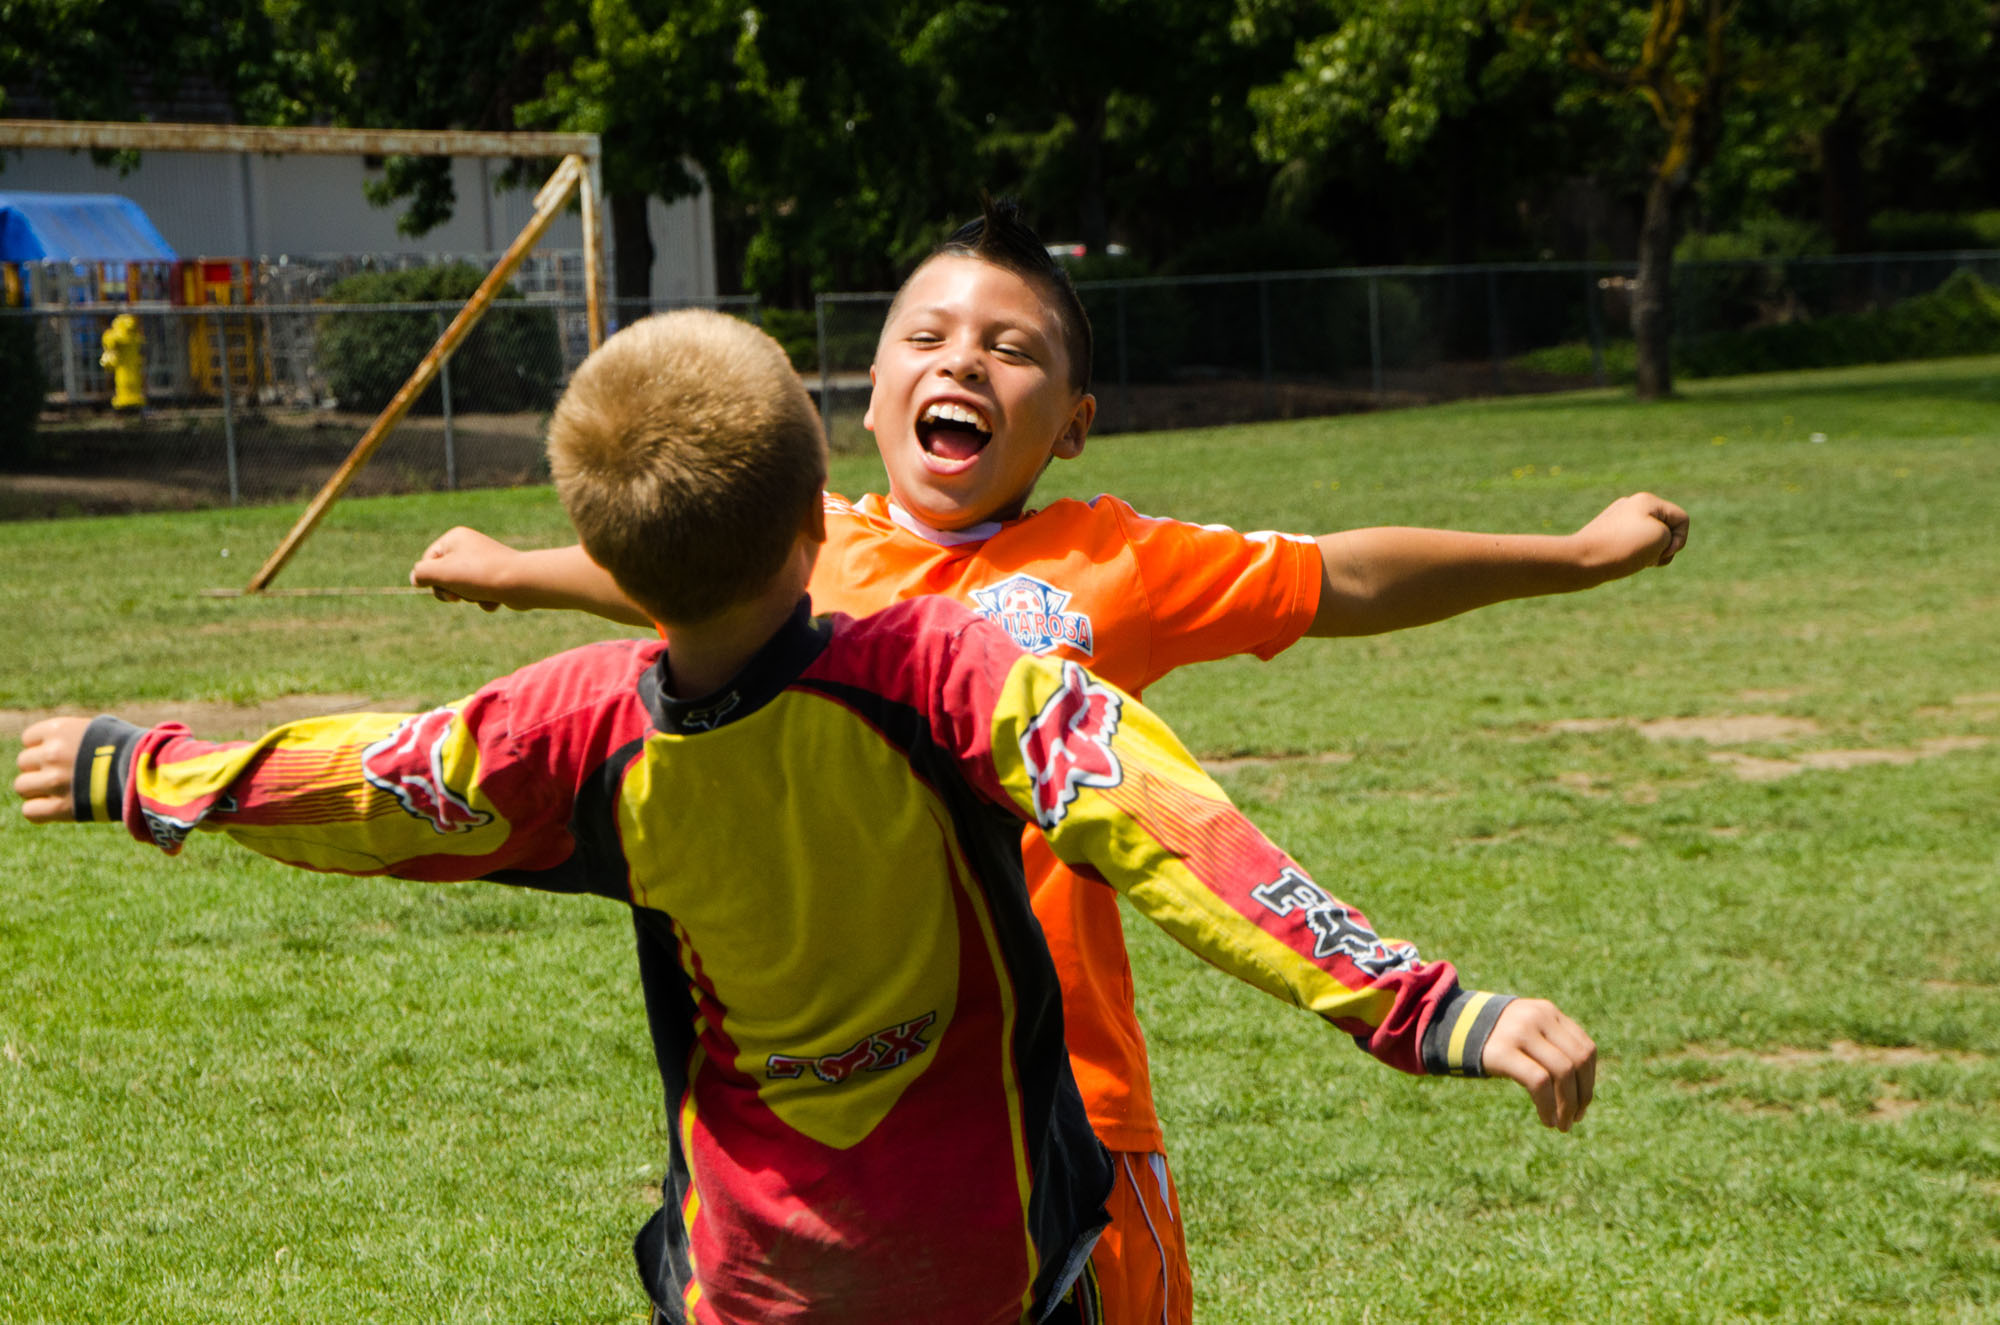 Two children on a soccer pitch jumping and chest bumping